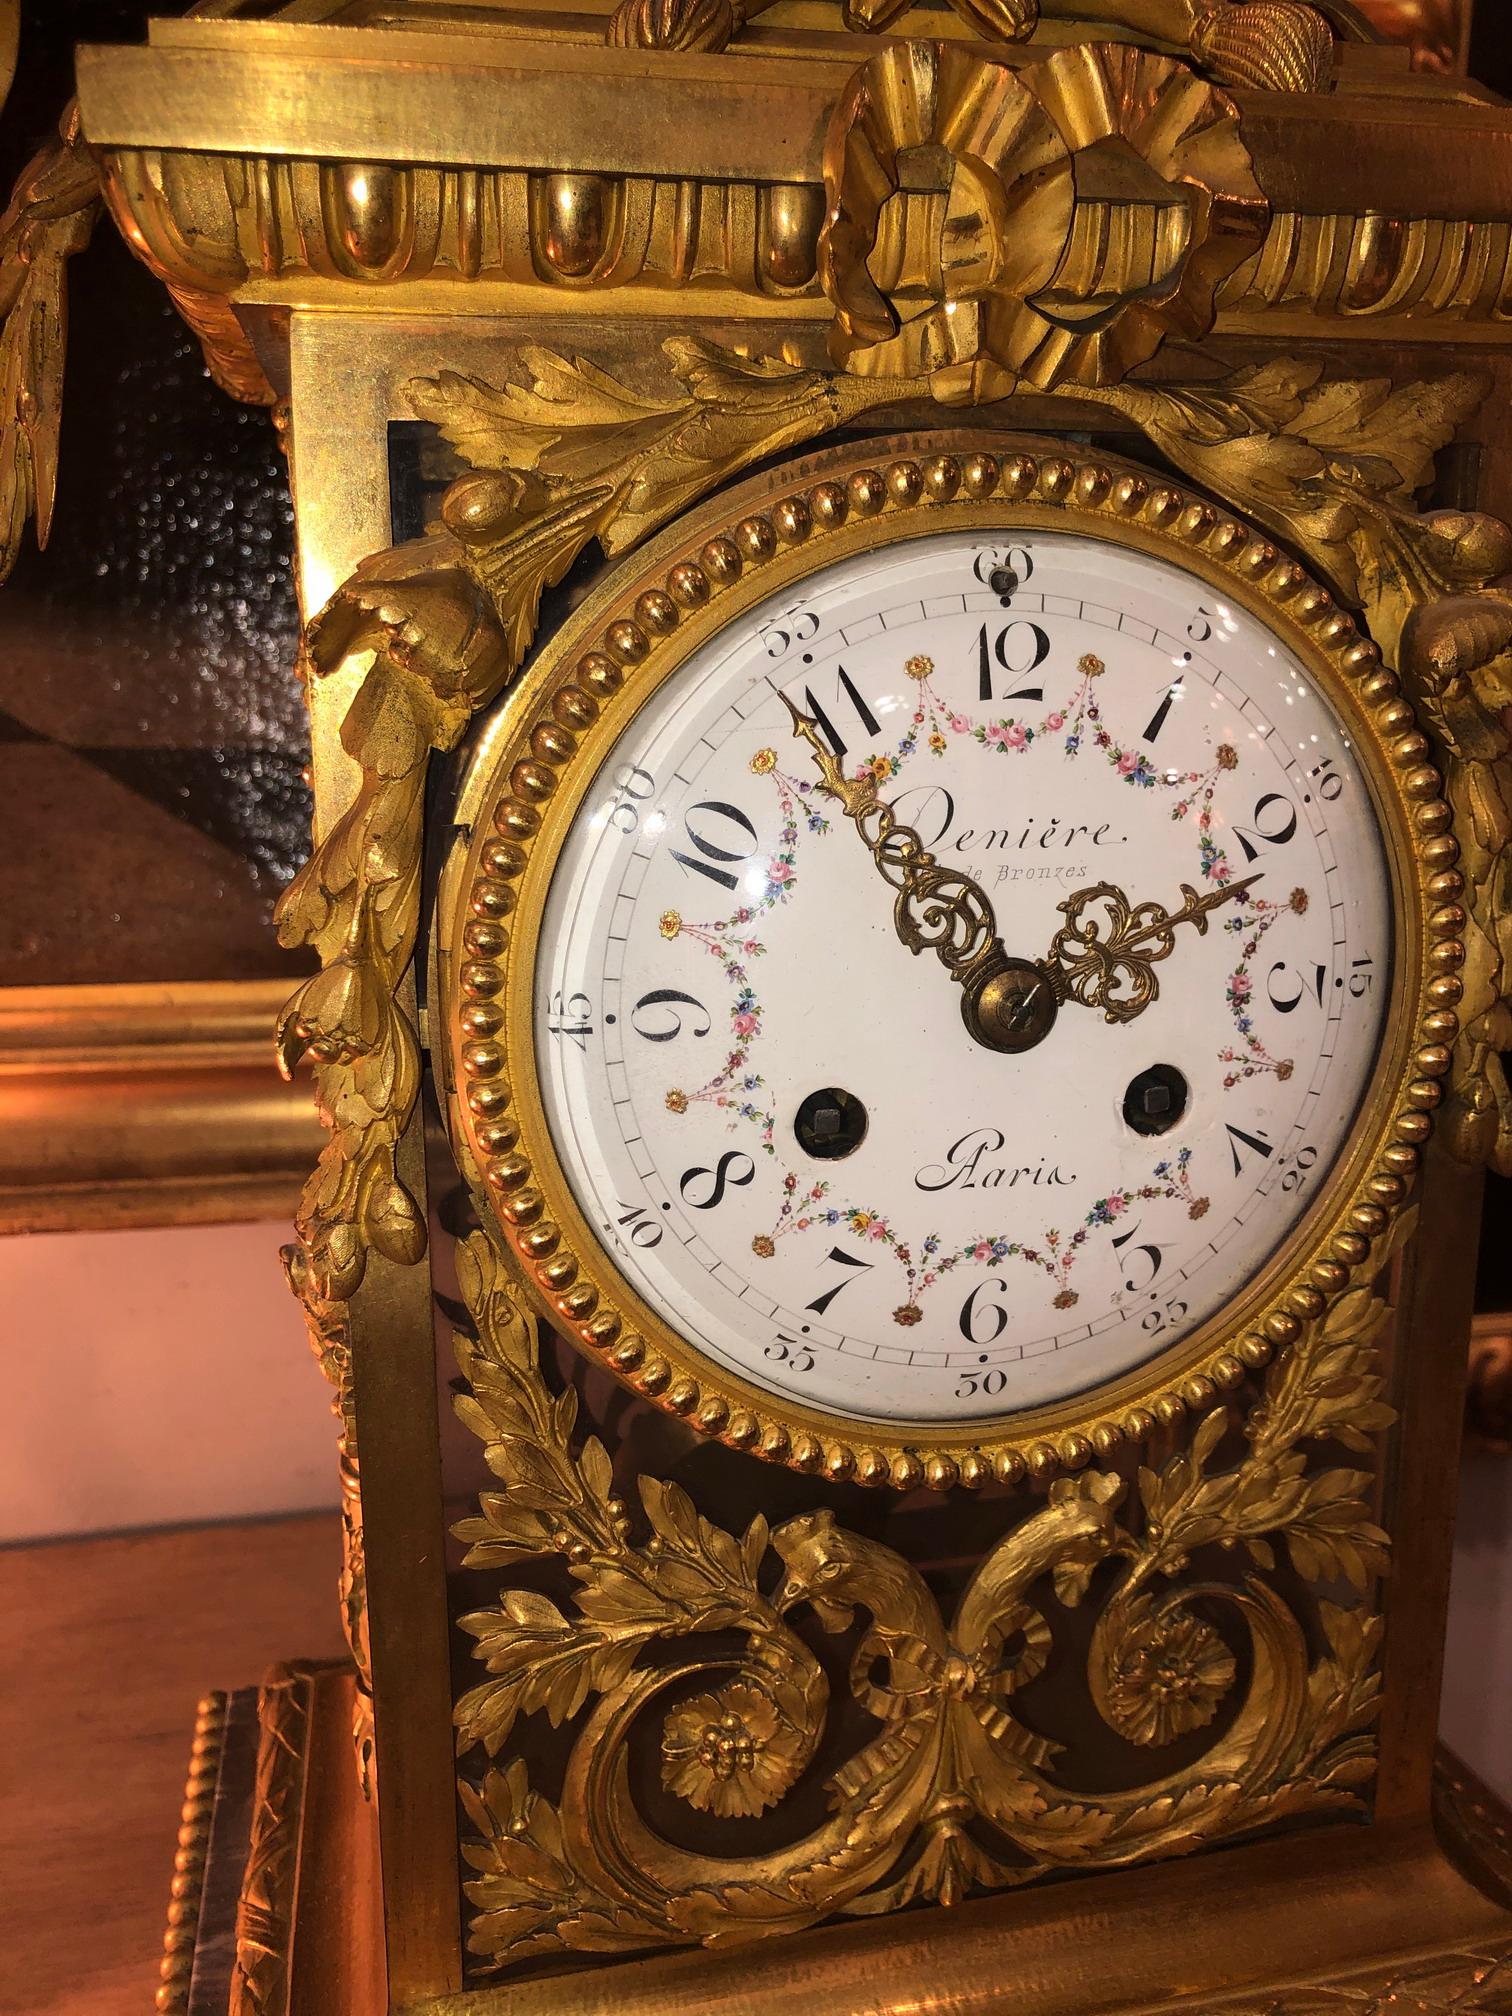 Deniere Gilt Bronze Mantle Clock in the Louis XVI taste. The case Jean Francois/ Guillaume Diniere (French 1820-1901) circa 1870, finely cast gilt bronze and marble mantle clock in the Louis XVI taste, surmounted by a ribbon tied quiver & torch. The